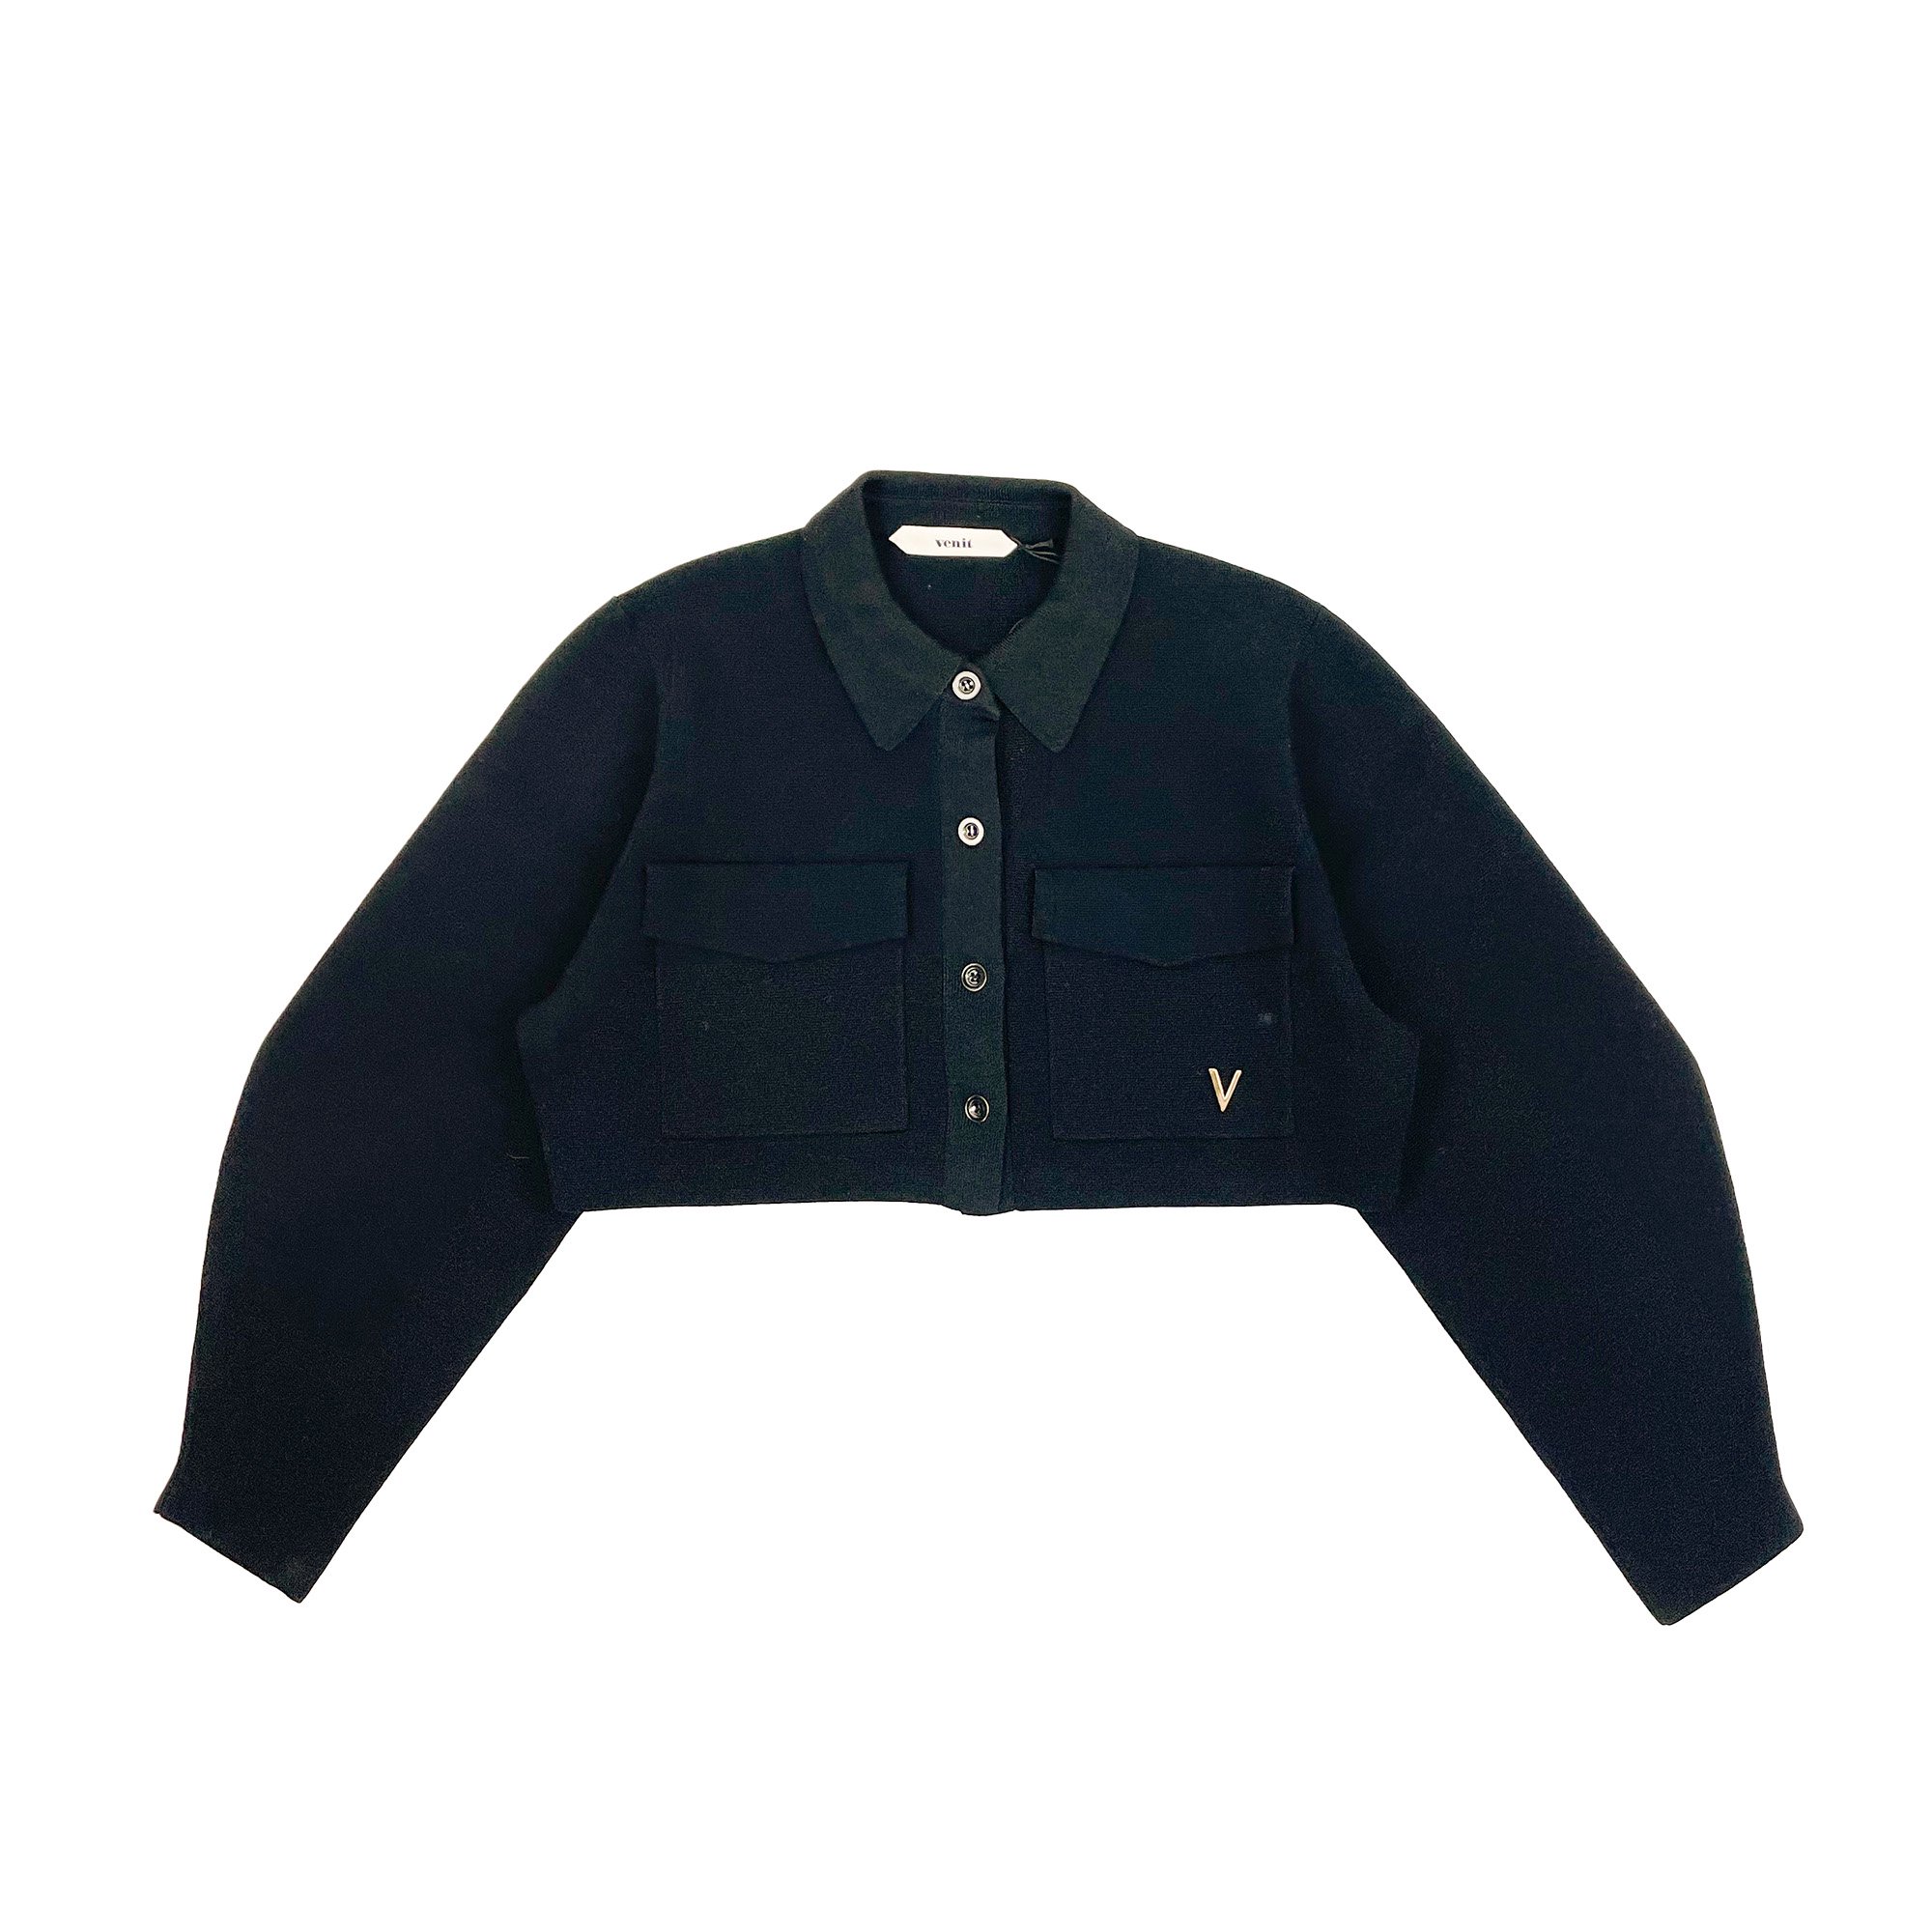 <img class='new_mark_img1' src='https://img.shop-pro.jp/img/new/icons47.gif' style='border:none;display:inline;margin:0px;padding:0px;width:auto;' />VENIT KNIT CARDIGAN